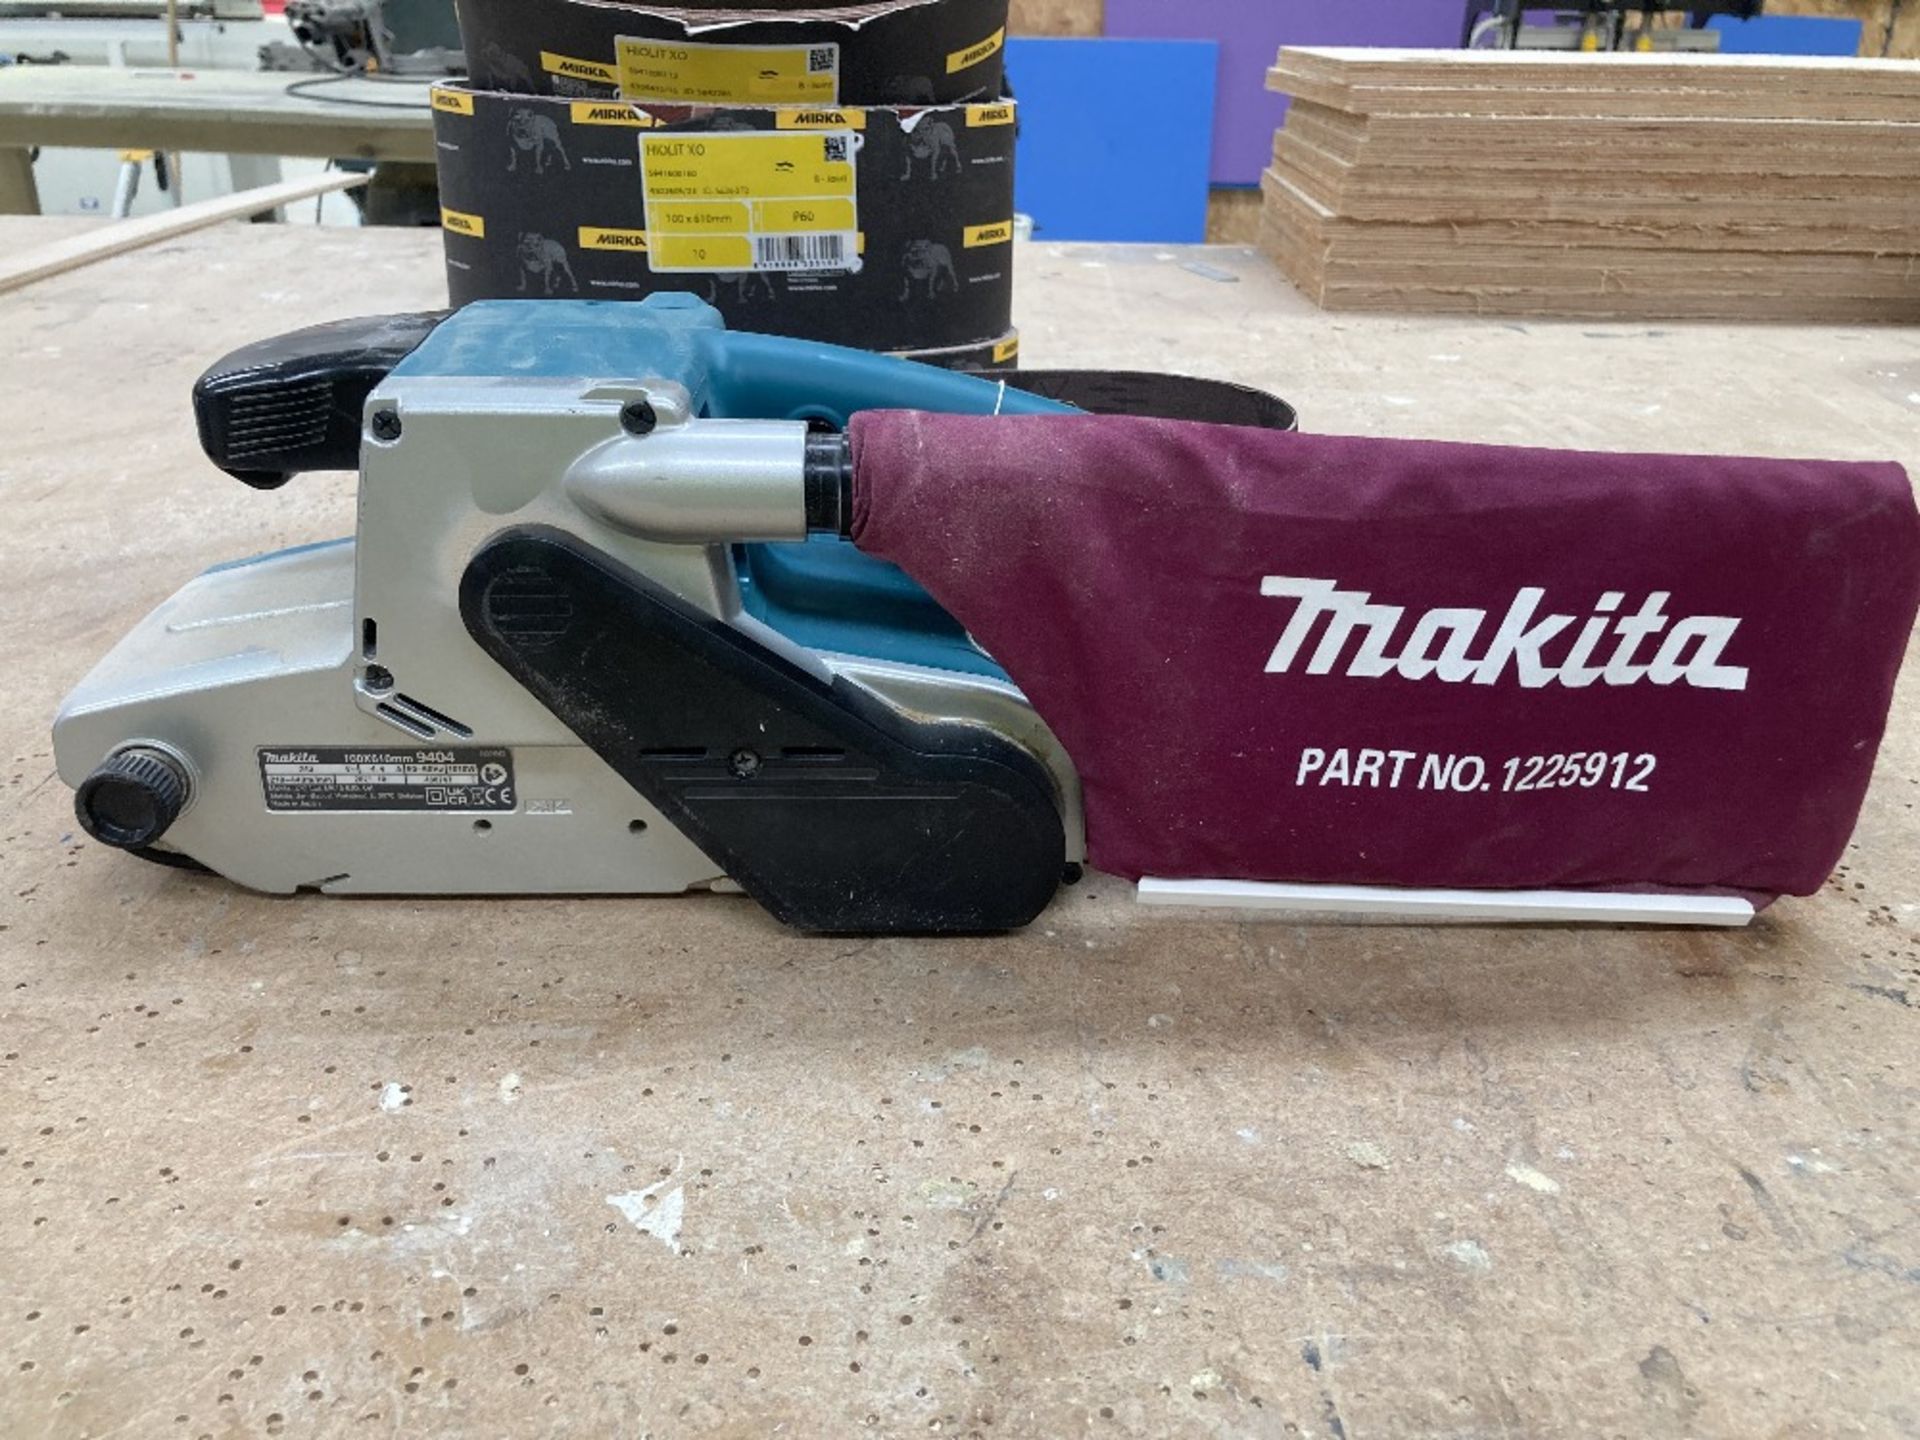 Makita 100x610mm 240v Planer Complete with Spare Sanding Belts - Image 4 of 9